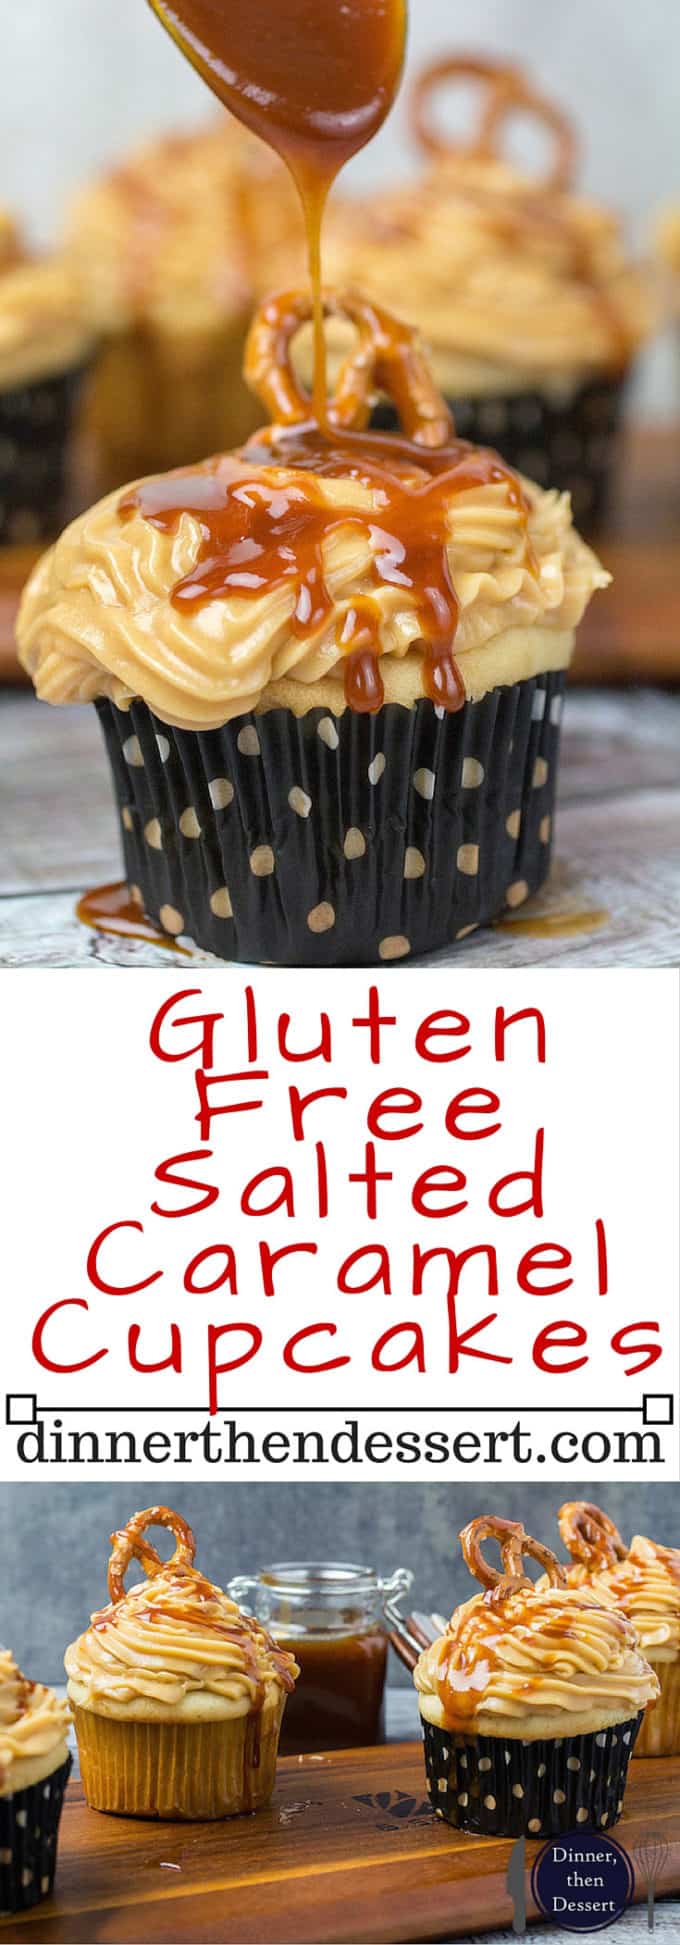 If you love the combination of sweet and salty, then these Gluten Free Salted Caramel Cupcakes are definitely for you. The decadent flavors of buttercream frosting combined with homemade salted caramel sauce on top of a vanilla cupcake come together to form a sweet and buttery treat. These cakes are light, fluffy, and full of flavor. Best of all? They're gluten free!